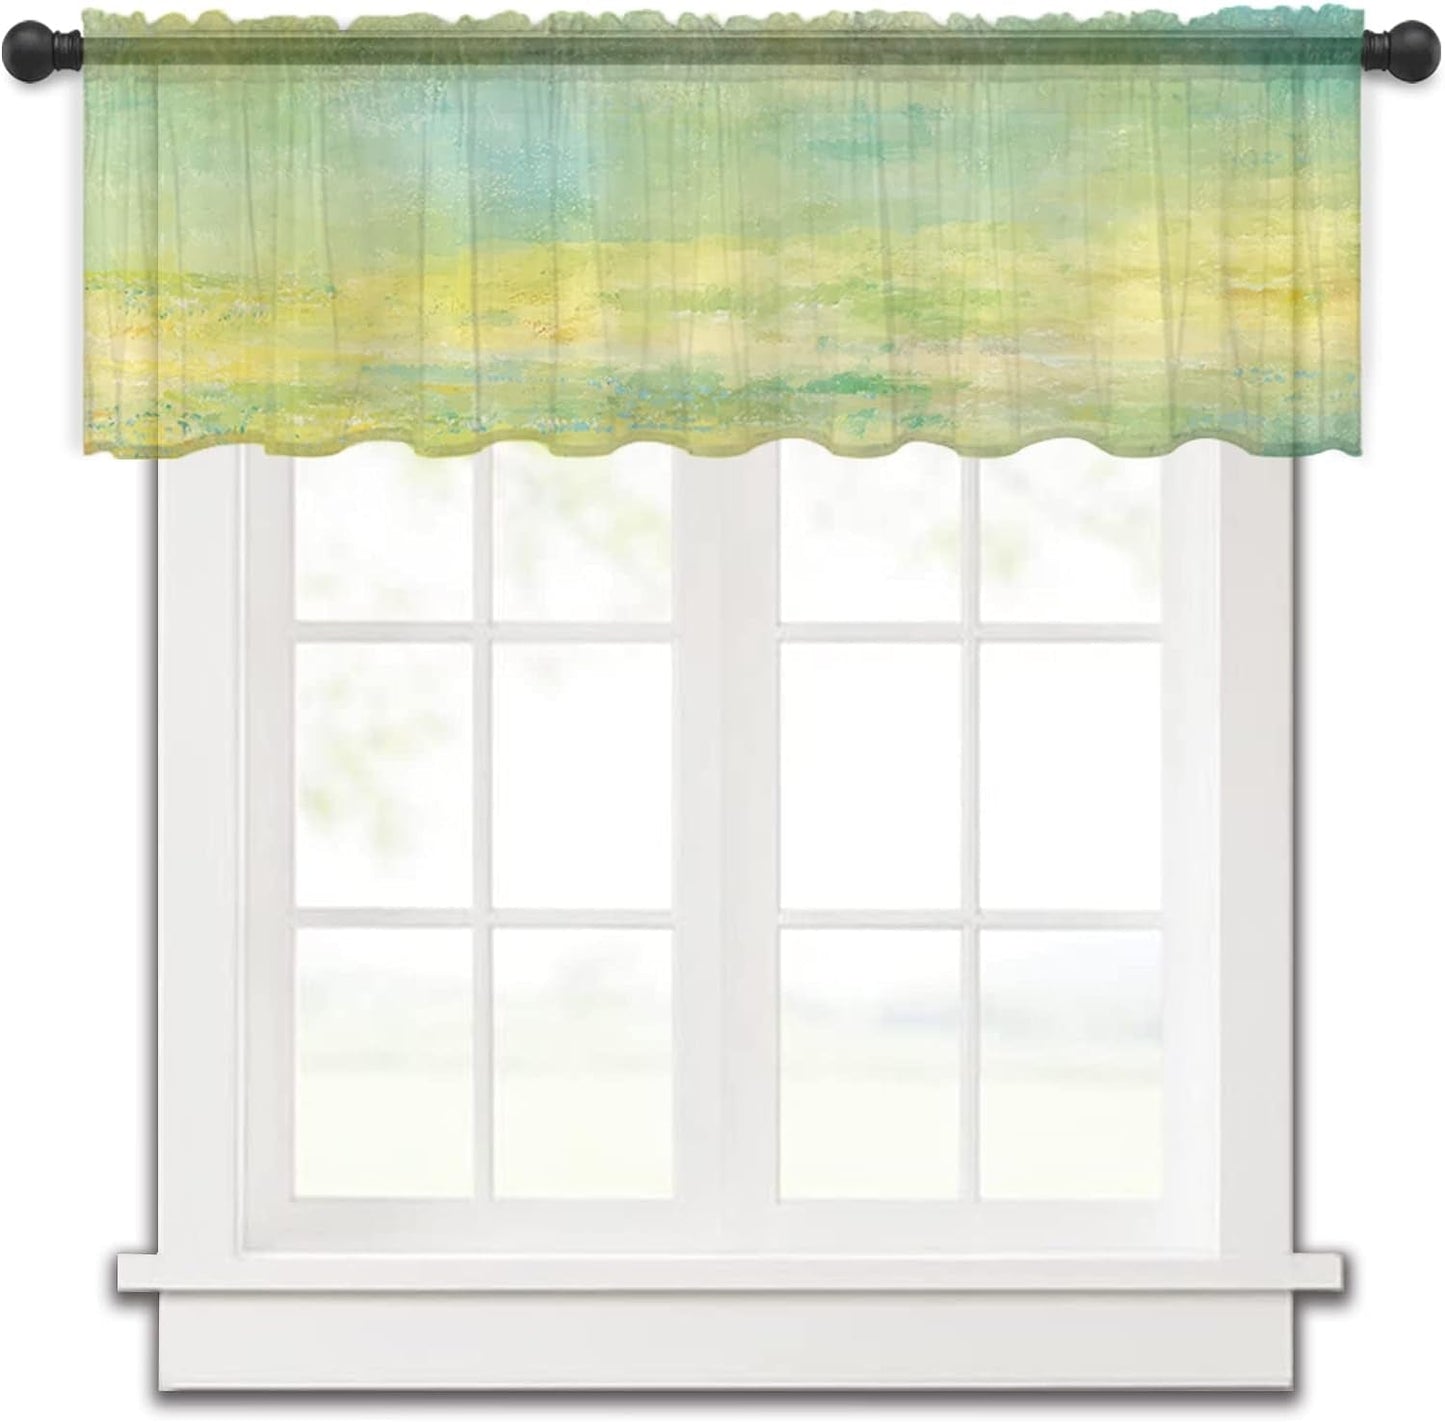 Abstract Watercolor Valance Curtains for Kitchen/Living Room/Bathroom/Bedroom Window, Ombre Green Yellow Painting Art Rod Pocket Small Topper Half Short Window Curtains Voile Sheer Scarf, 54"X18"